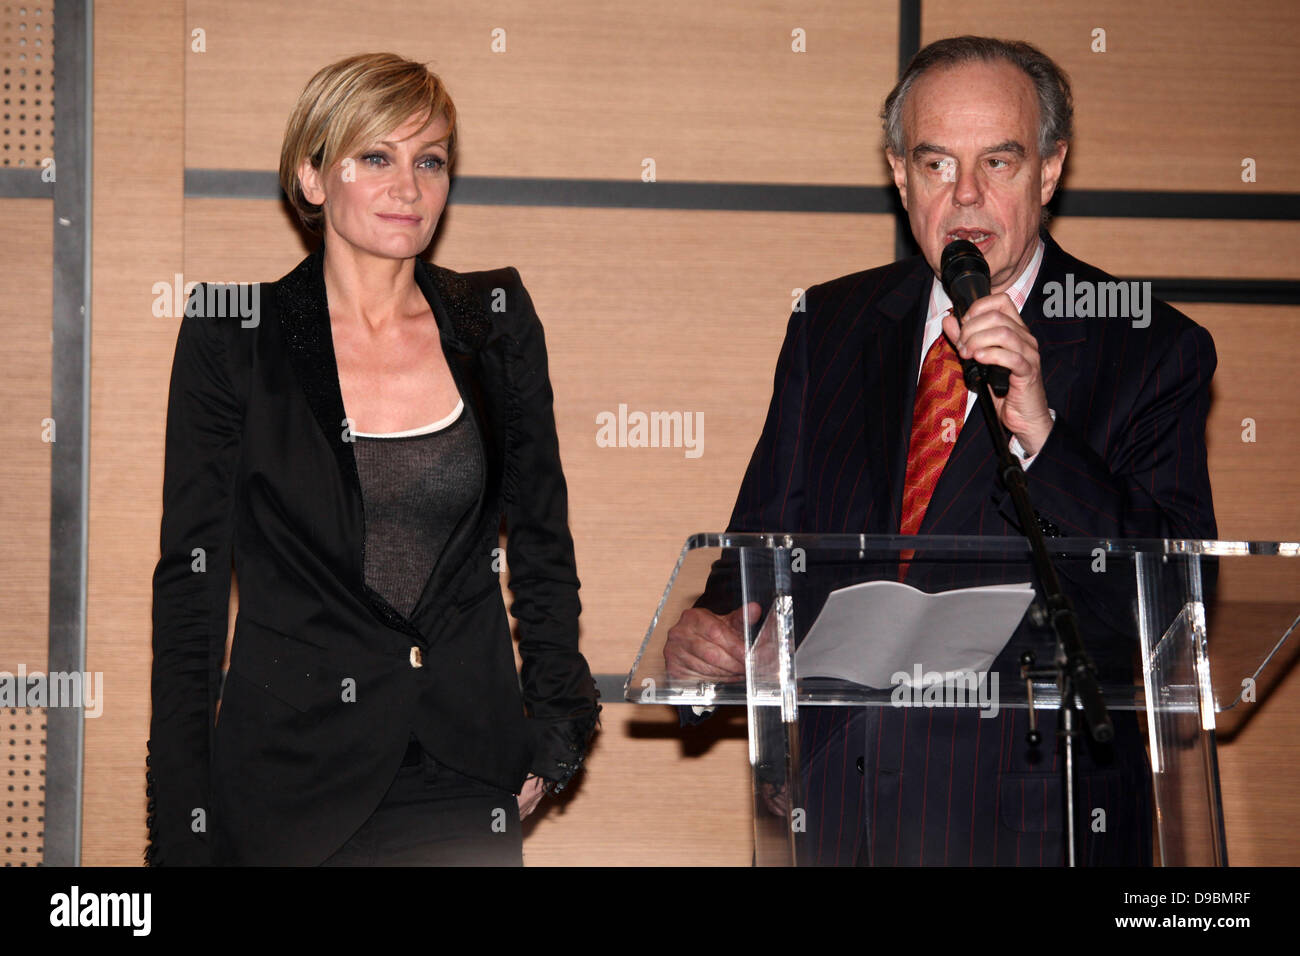 Patricia Kaas receives the title of Chevalier des Arts et des Lettres by Frederic Mitterrand NRJ Music Awards - Ceremony Cannes, France - 28.01.12 Stock Photo